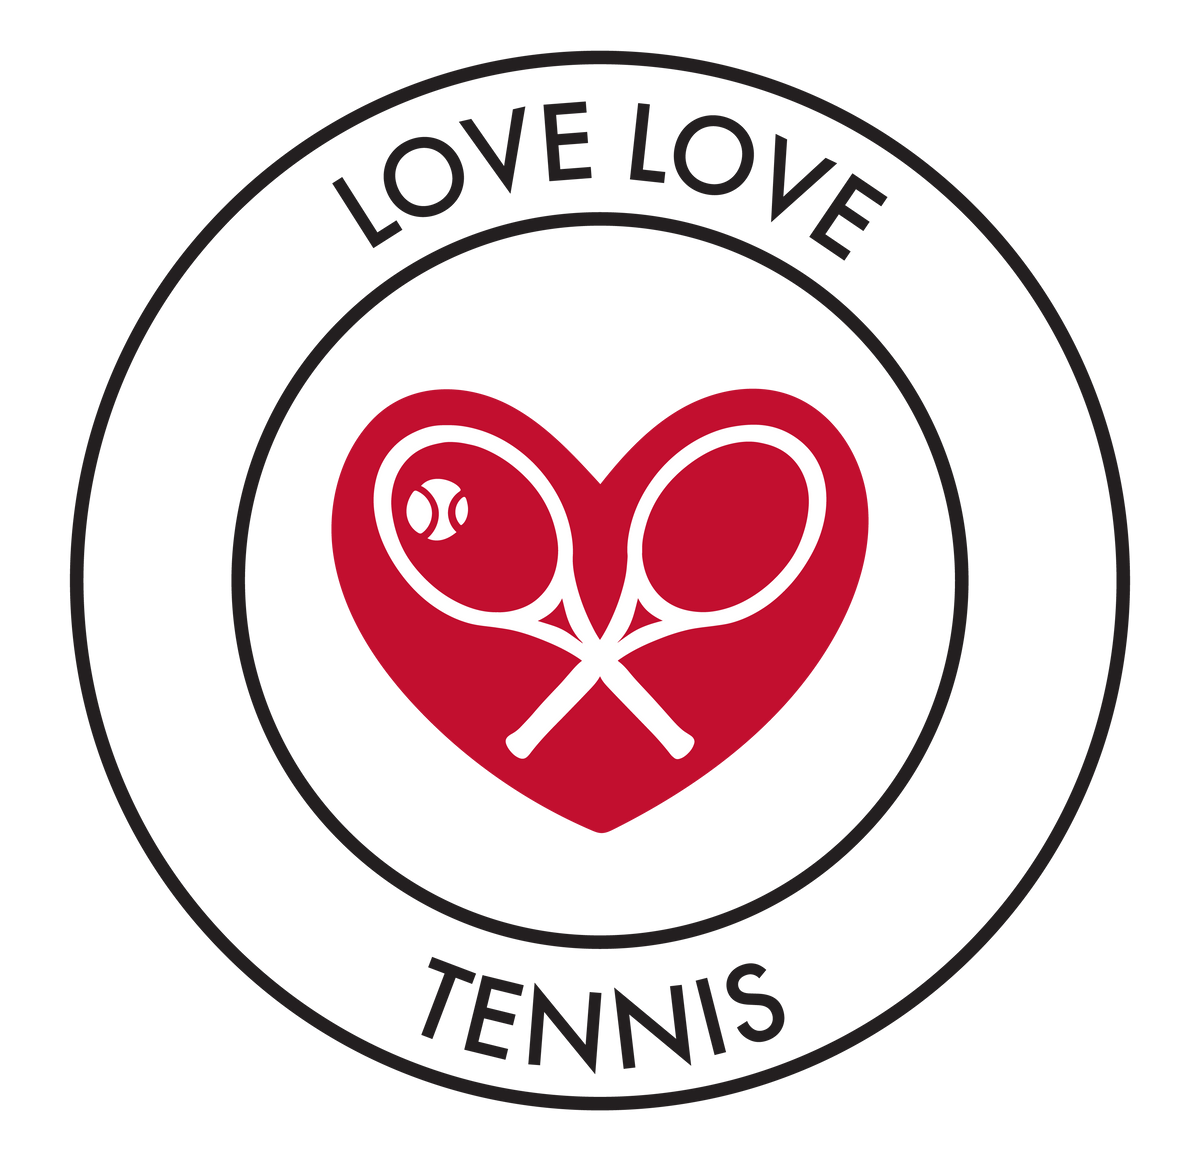 Tennis League for Women Over 40 Years Old USTA USA Tennis Club Country Club I heart Tennis Doubles Match  - Love Love Tennis